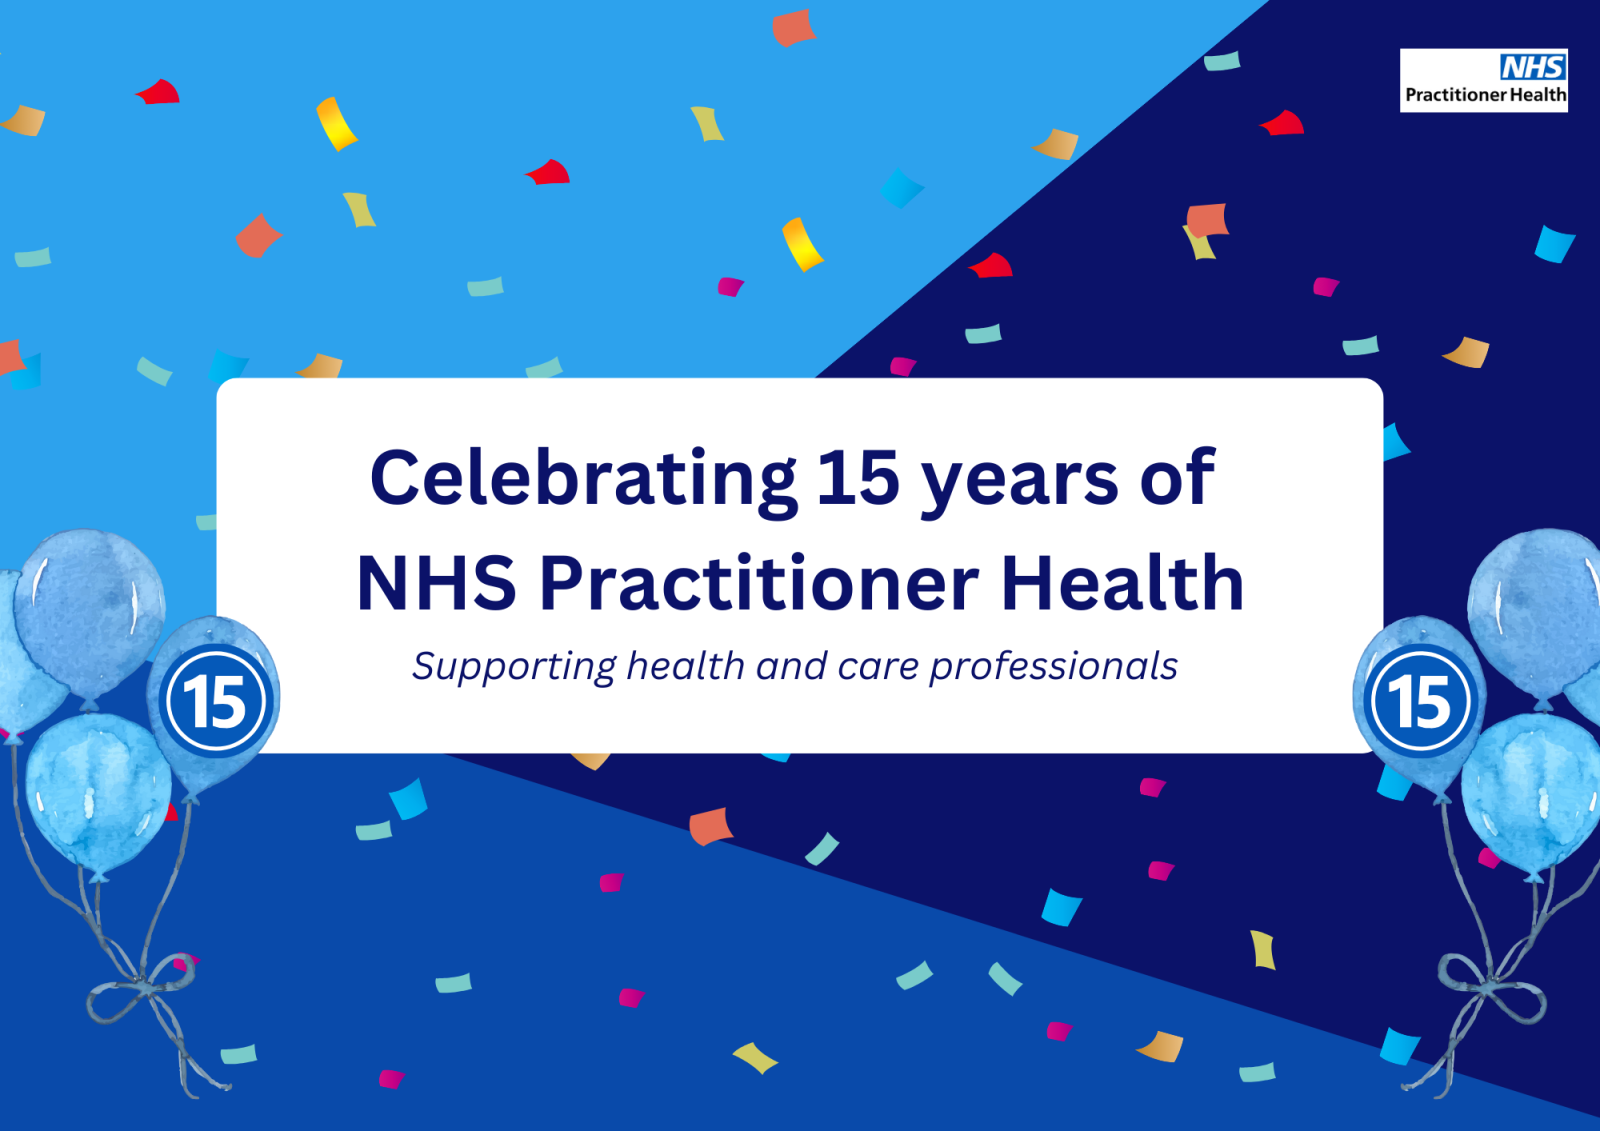 Image reads "Celebrating 15 years of NHS Practitioner Health supporting health and care professionals